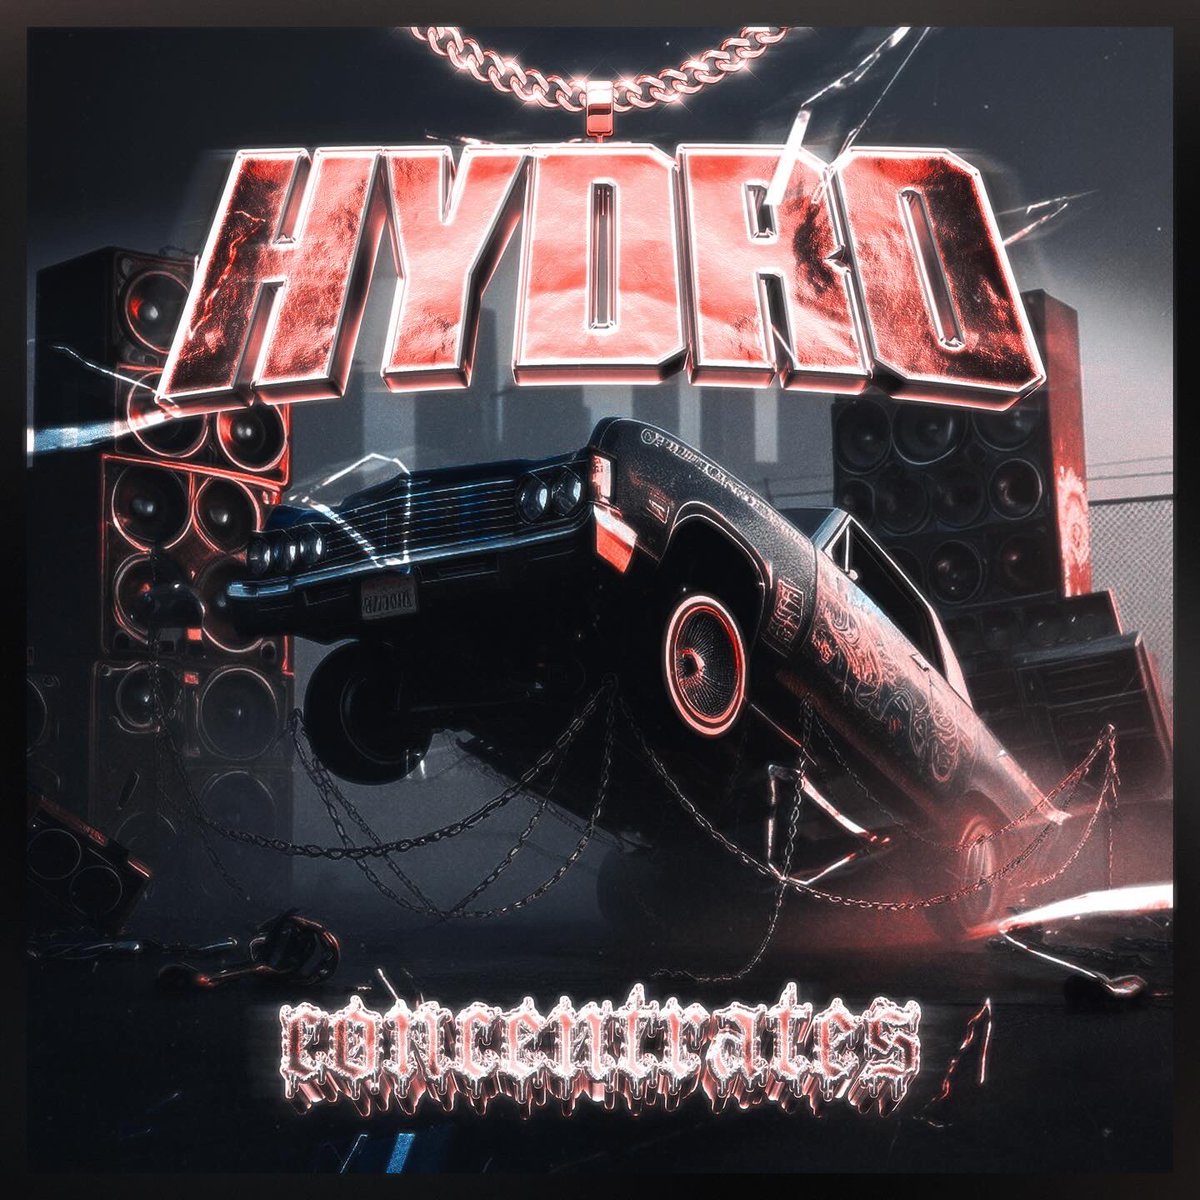 HYDRO OUT NOW 🖤 NEW RIDDIM SHIT. GO BUMP THIS SHOT FOR ME TODAY 🙏